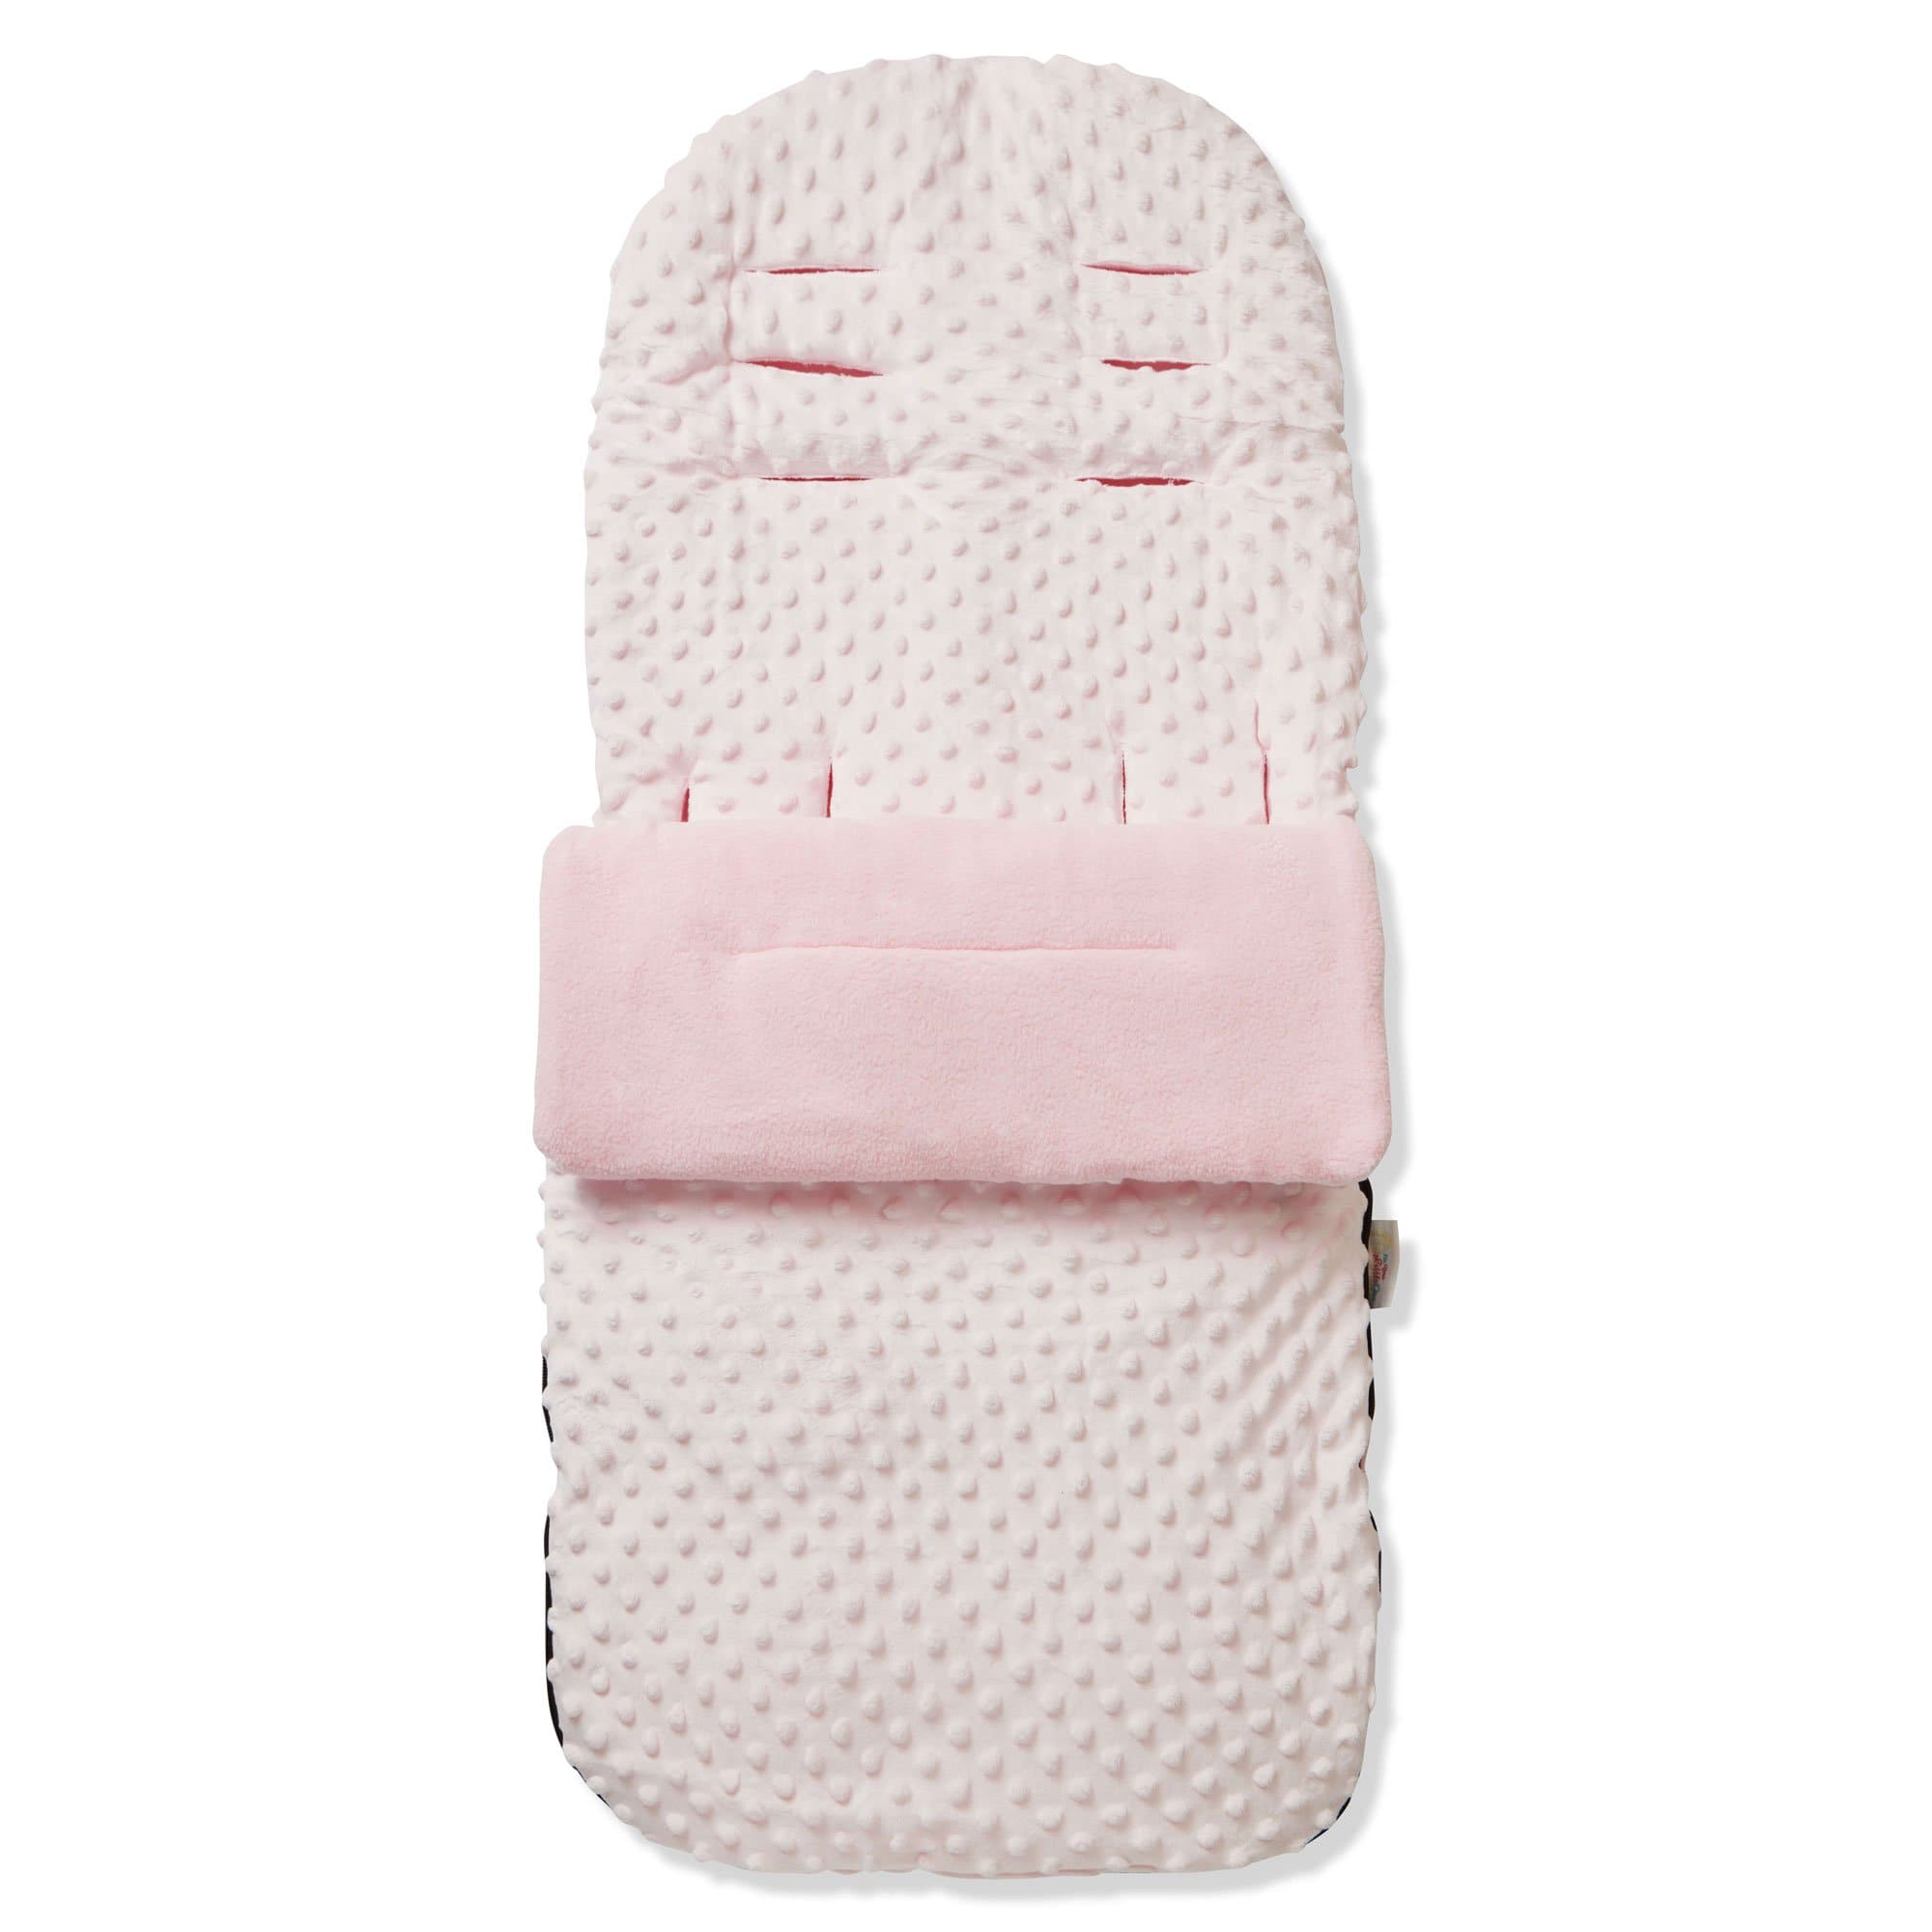 Dimple Footmuff / Cosy Toes Compatible with Greentom - Pink / Fits All Models | For Your Little One